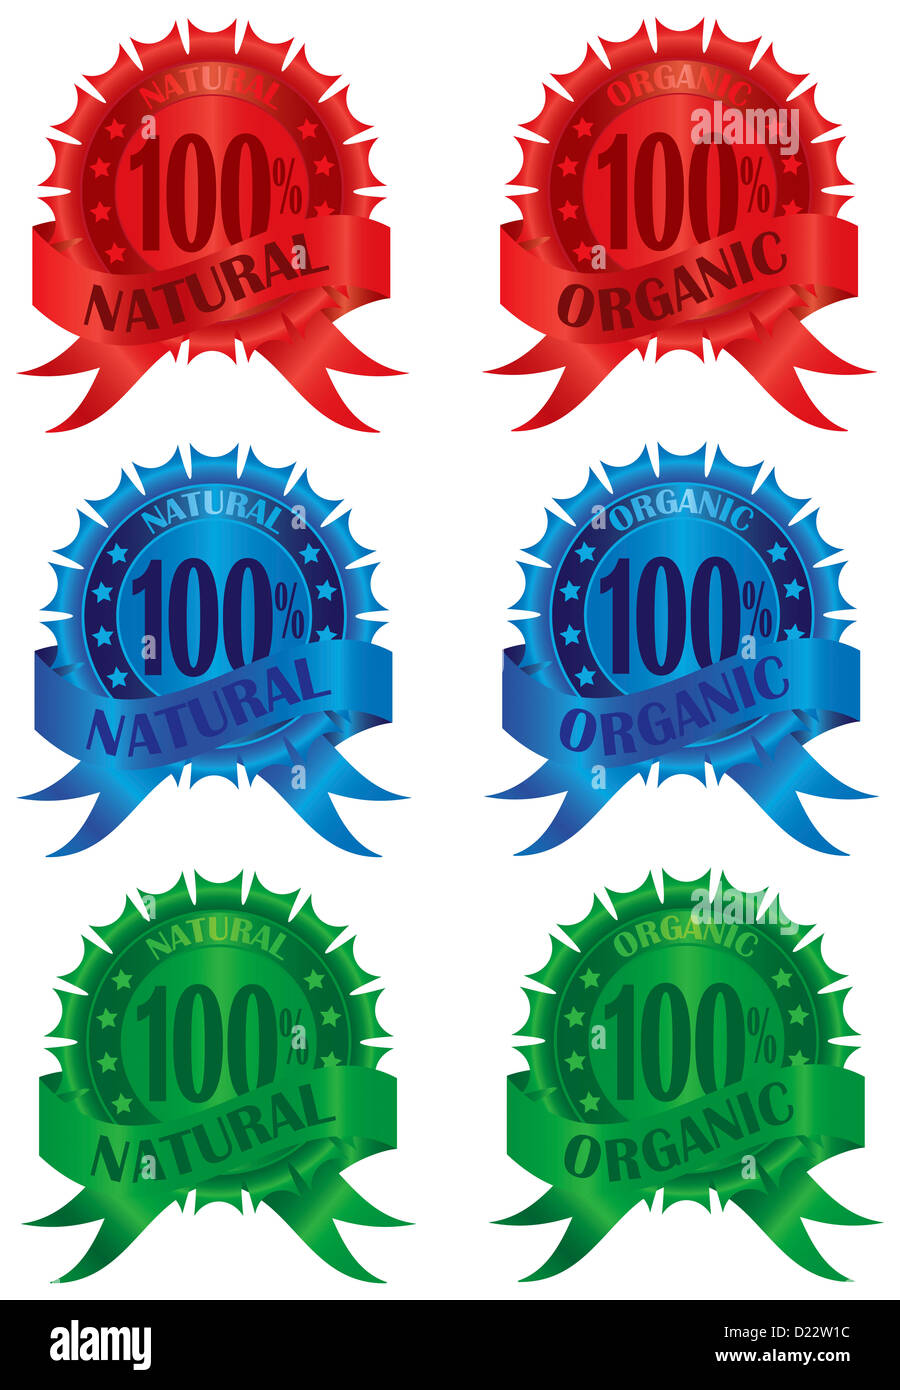 Food Products 100% Natural Organic in Red Blue and Green Colors Labels Illustration Stock Photo